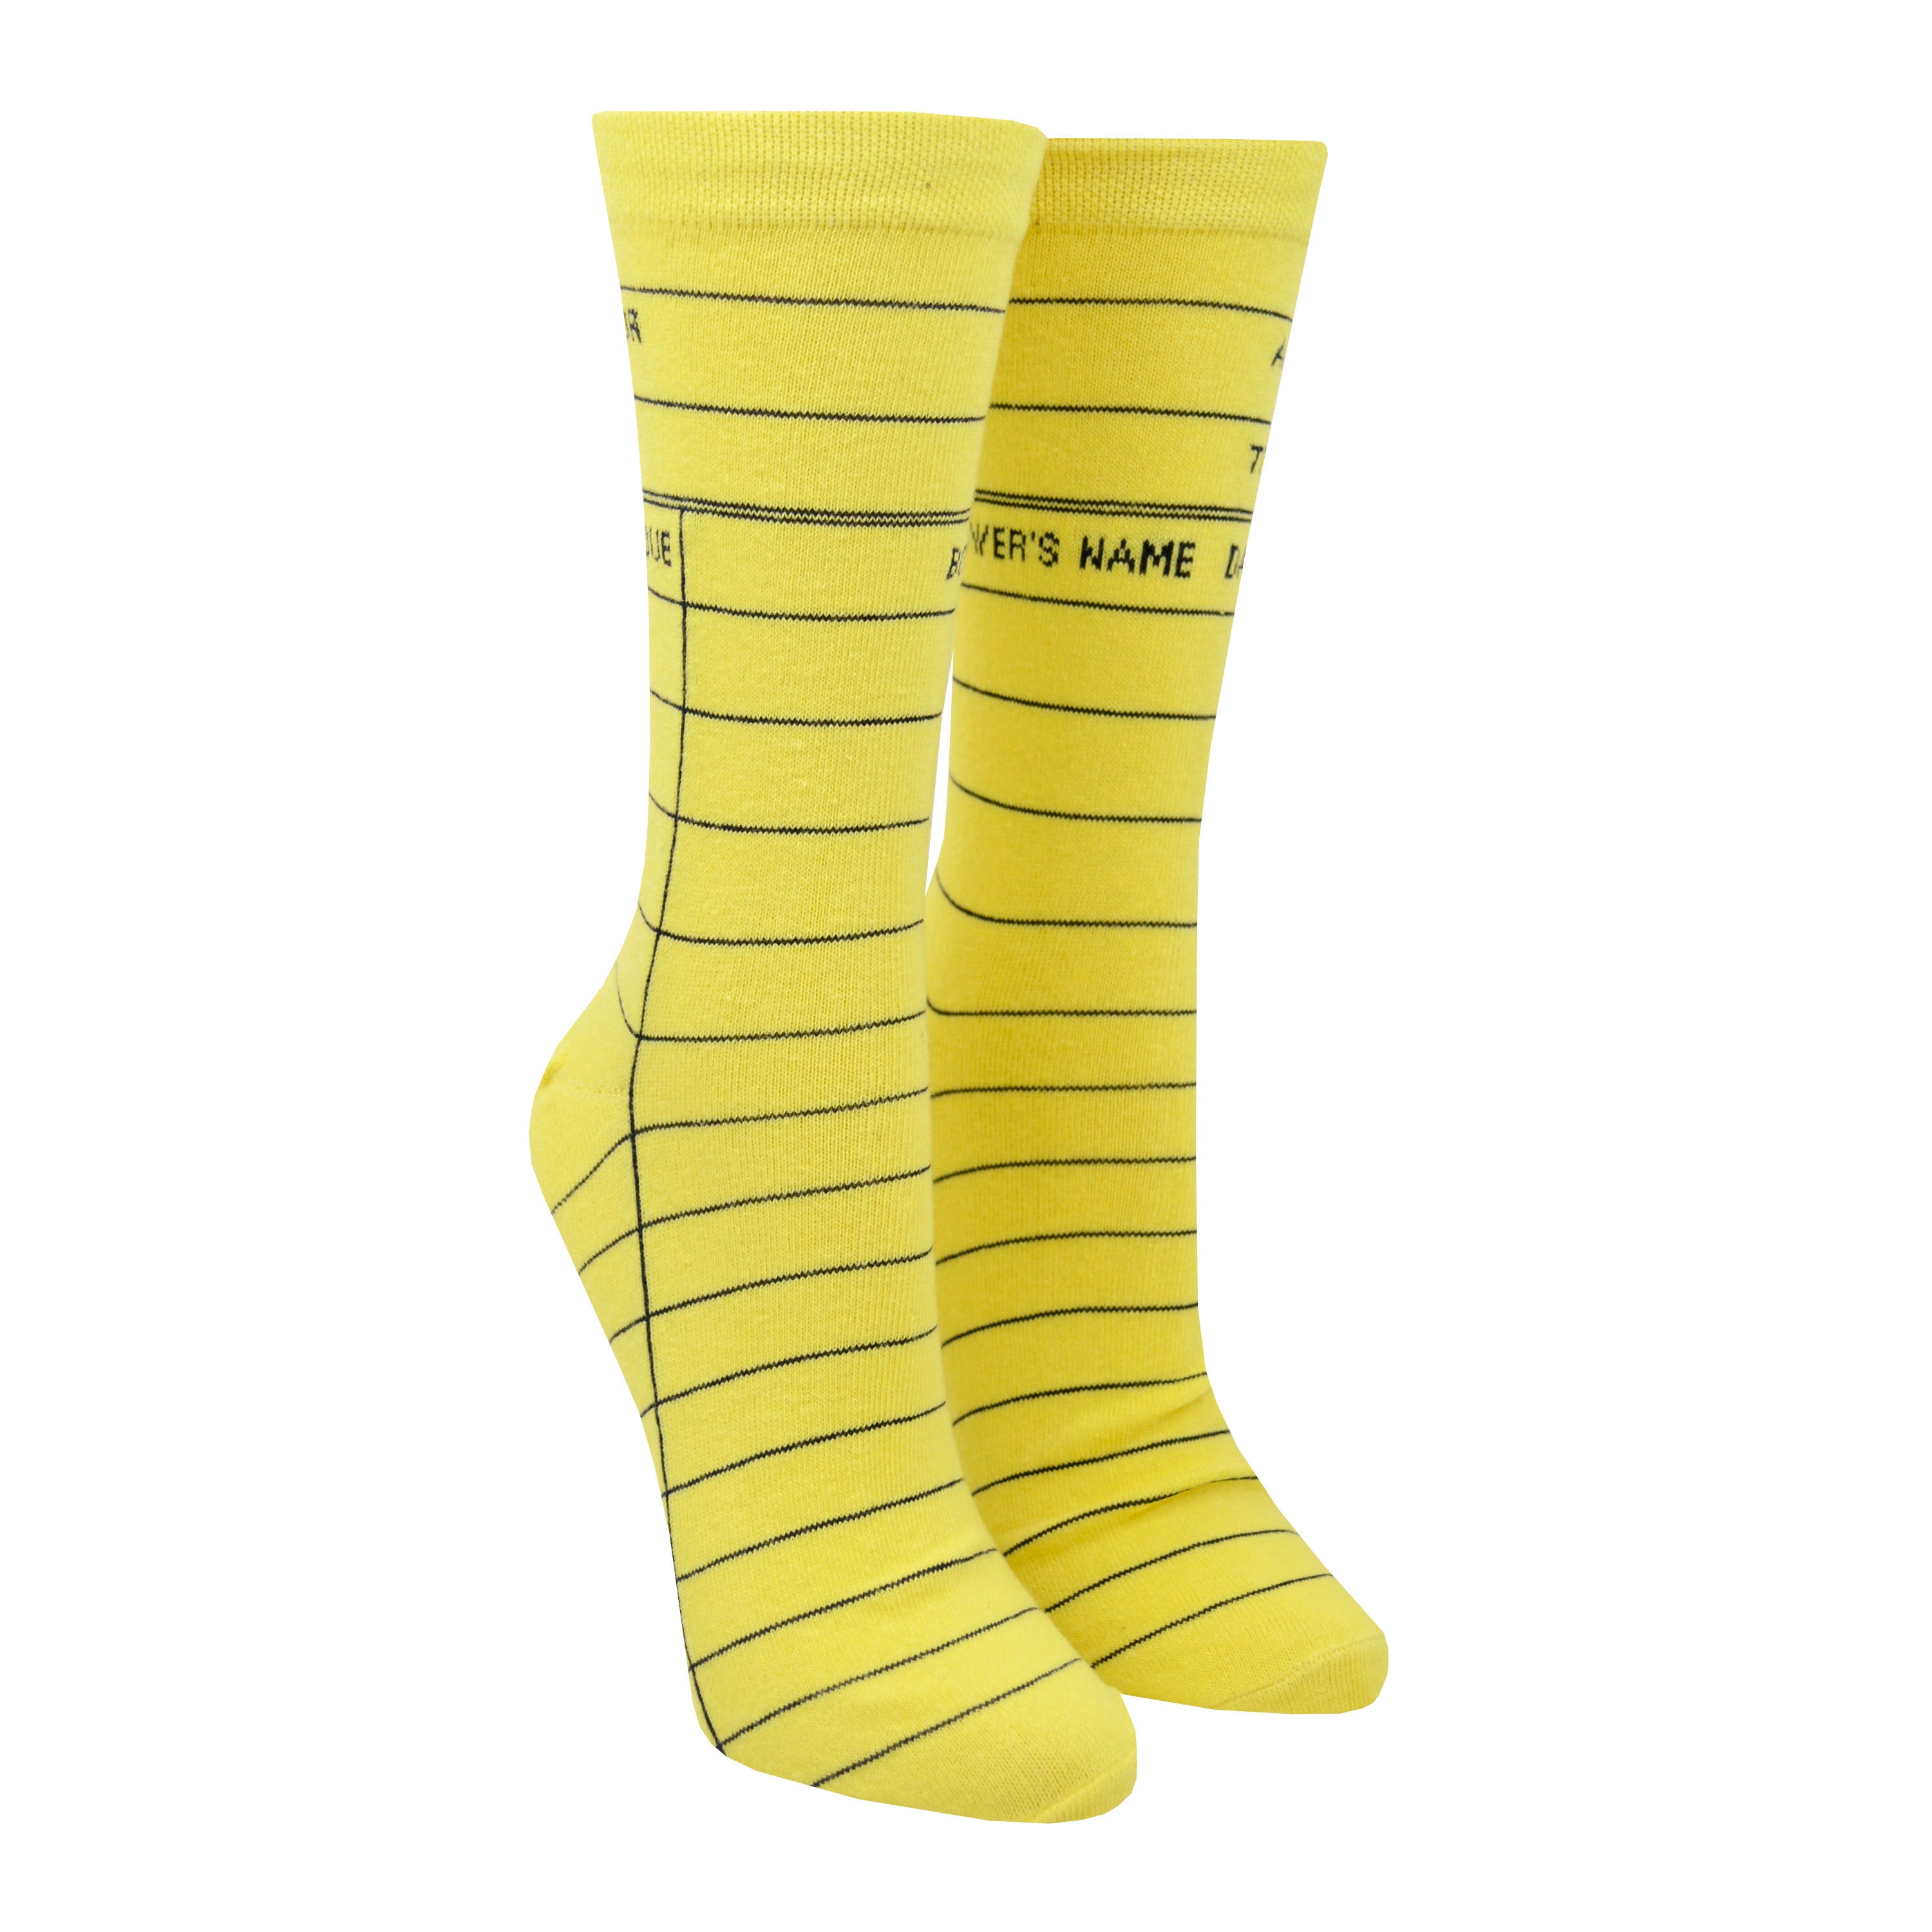 Shown on a leg form in the women's size, these yellow cotton unisex crew socks by the brand Out of Print feature the iconic library card design with the words 